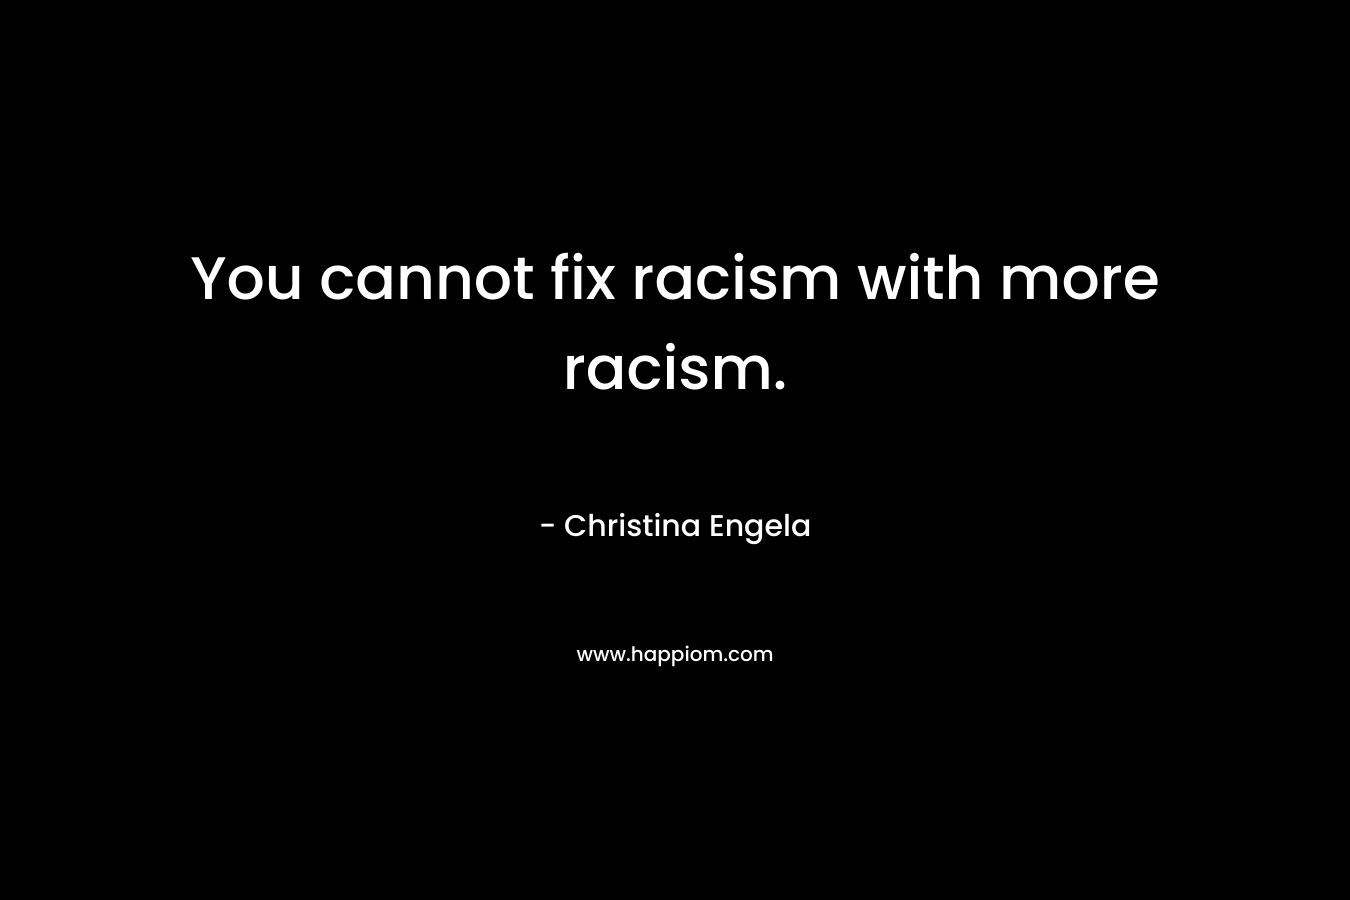 You cannot fix racism with more racism.